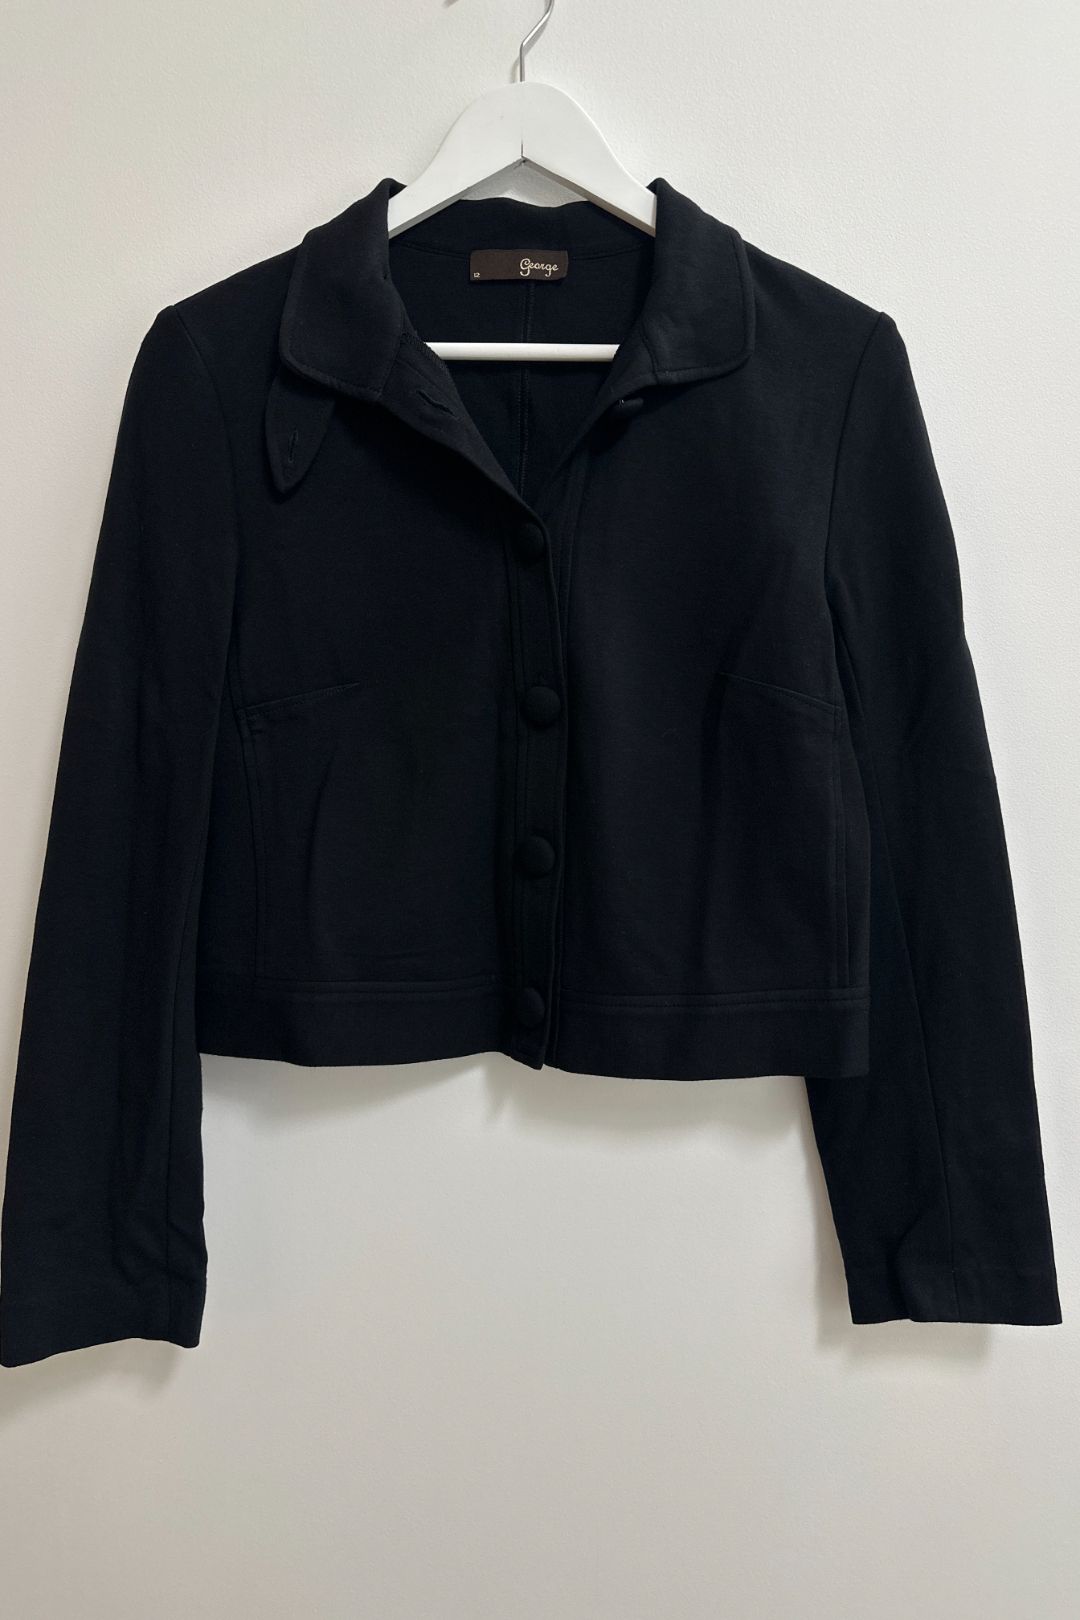 George Black Jacket With Covered Buttons